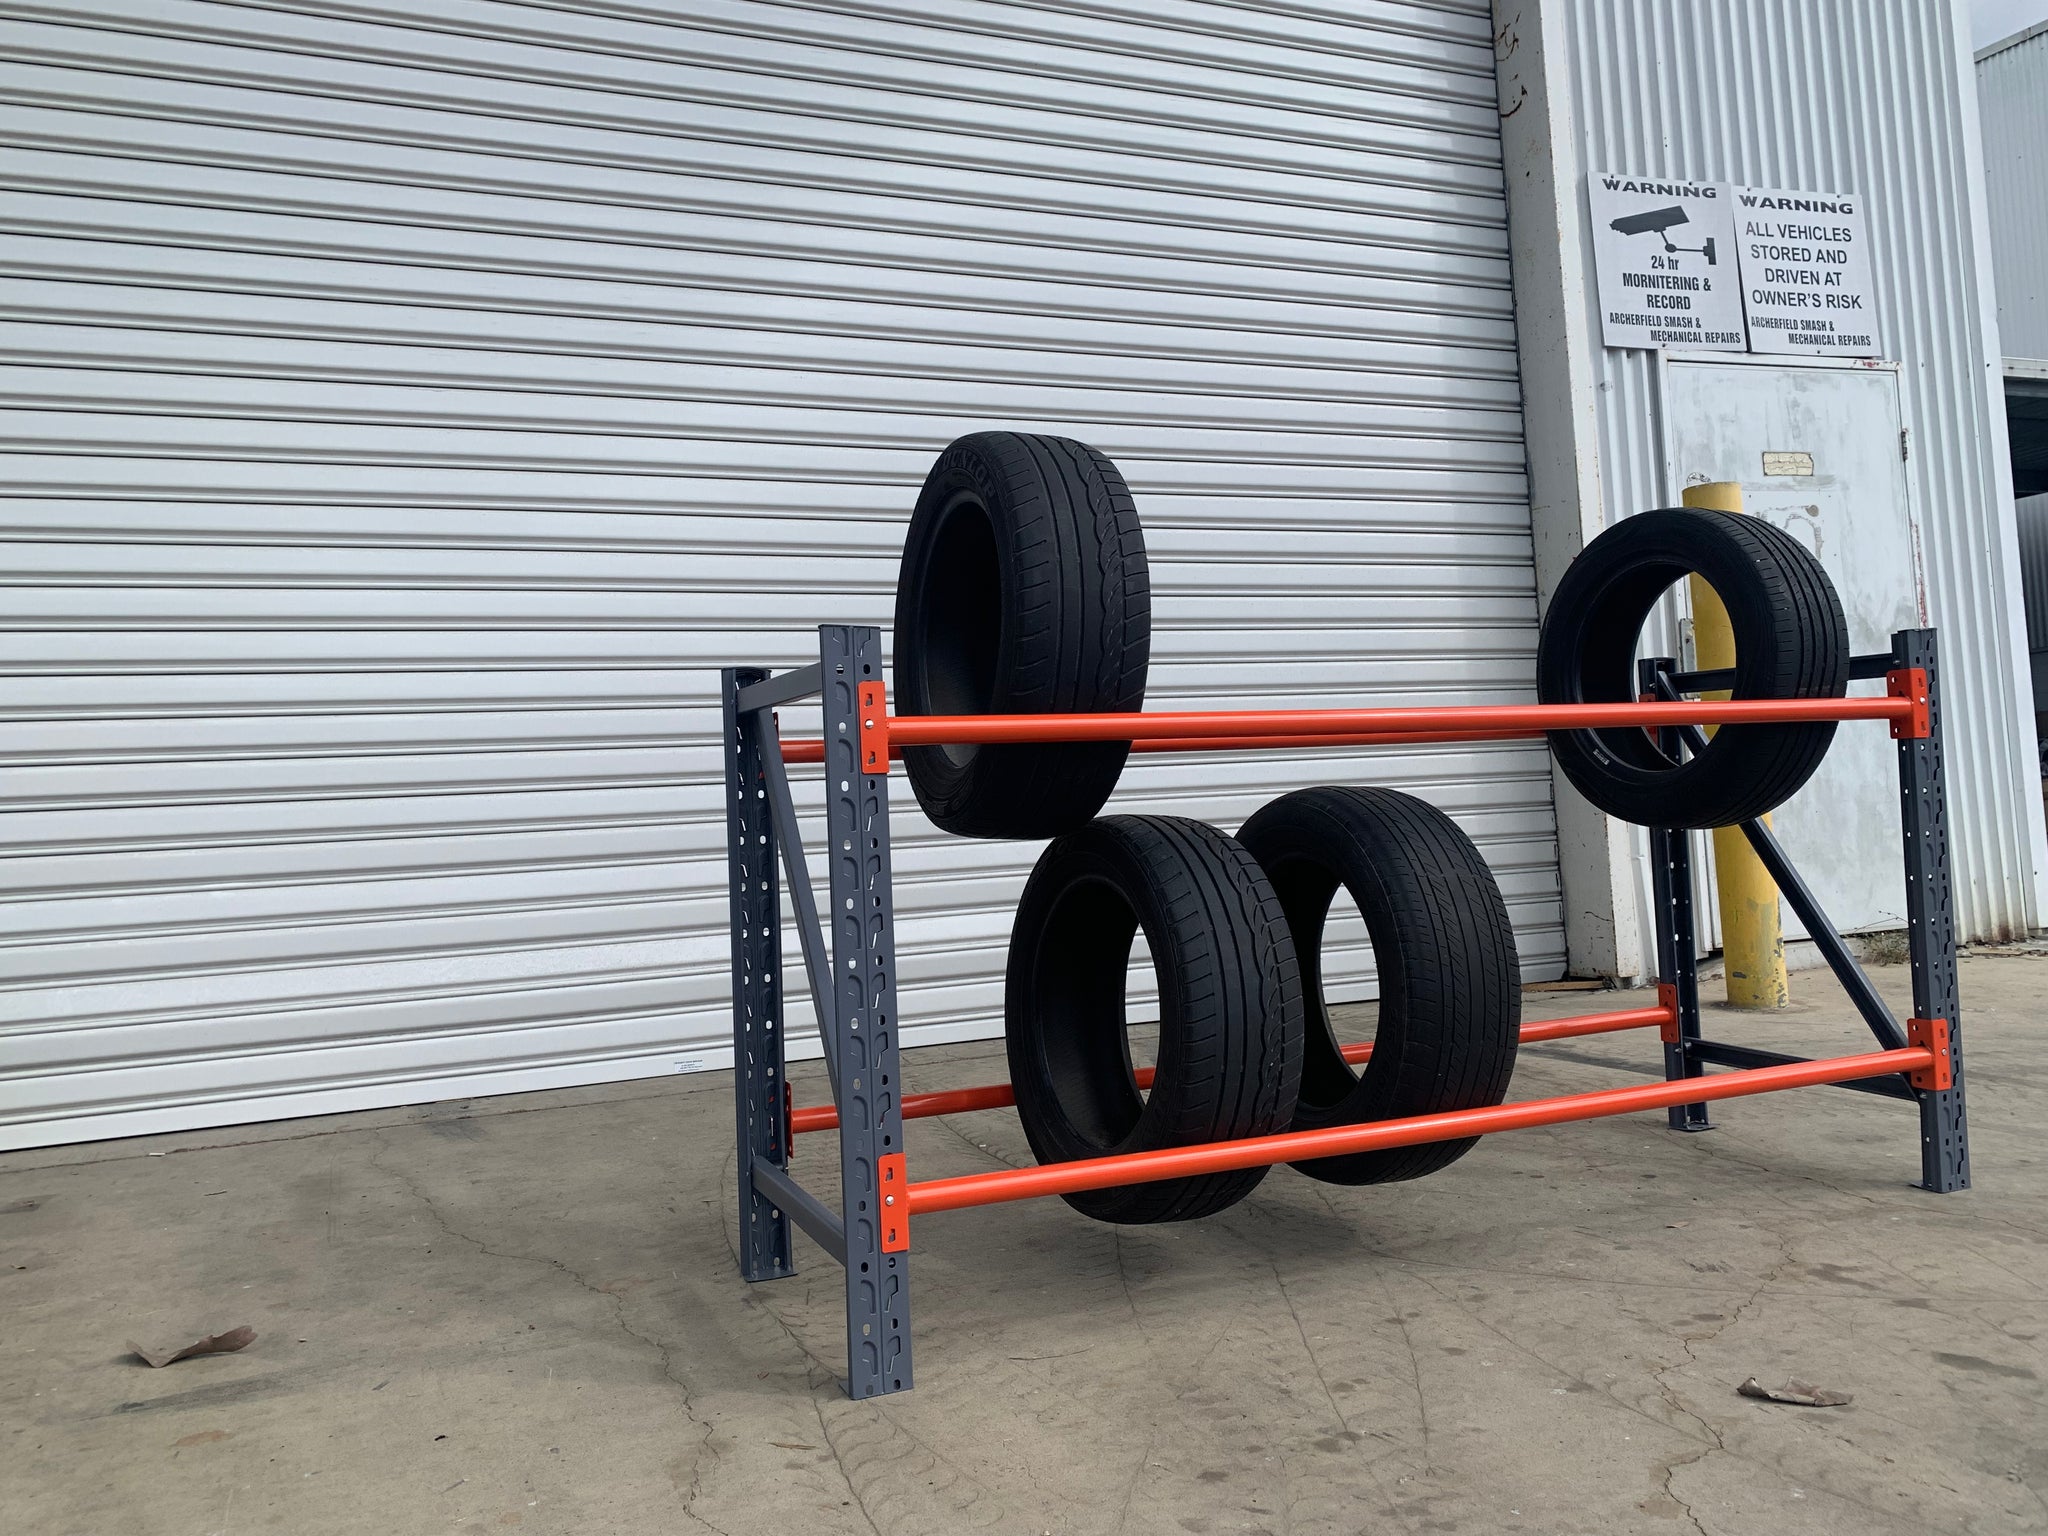 Charcoal and Orange 500kg 2 Tier Tyre Rack Installation and Delivery Package. 500kg/ 14tyres Max